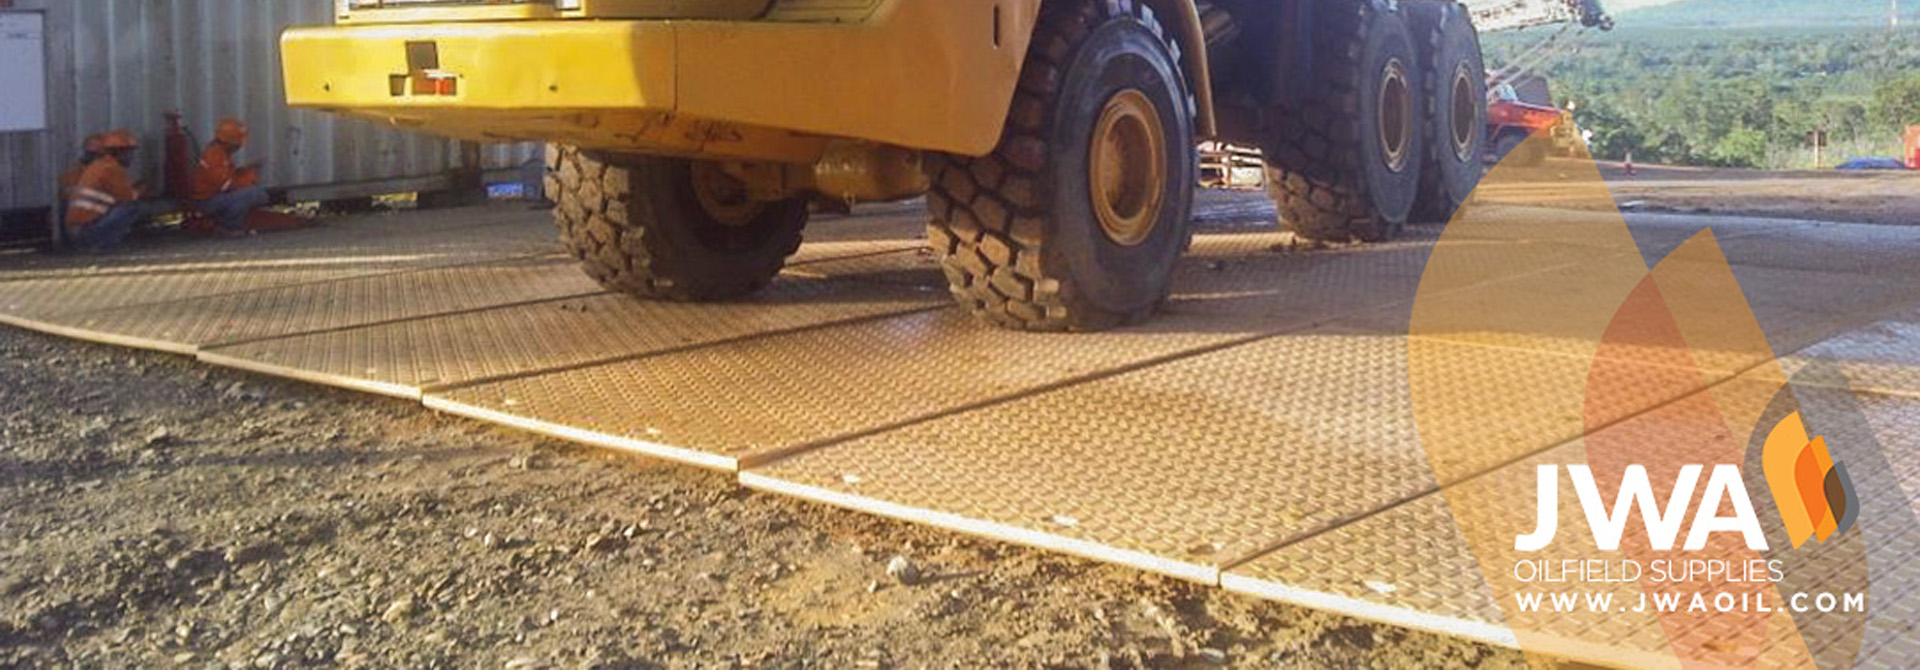 Improving Ground Suitability for Remote Maintenance Bays